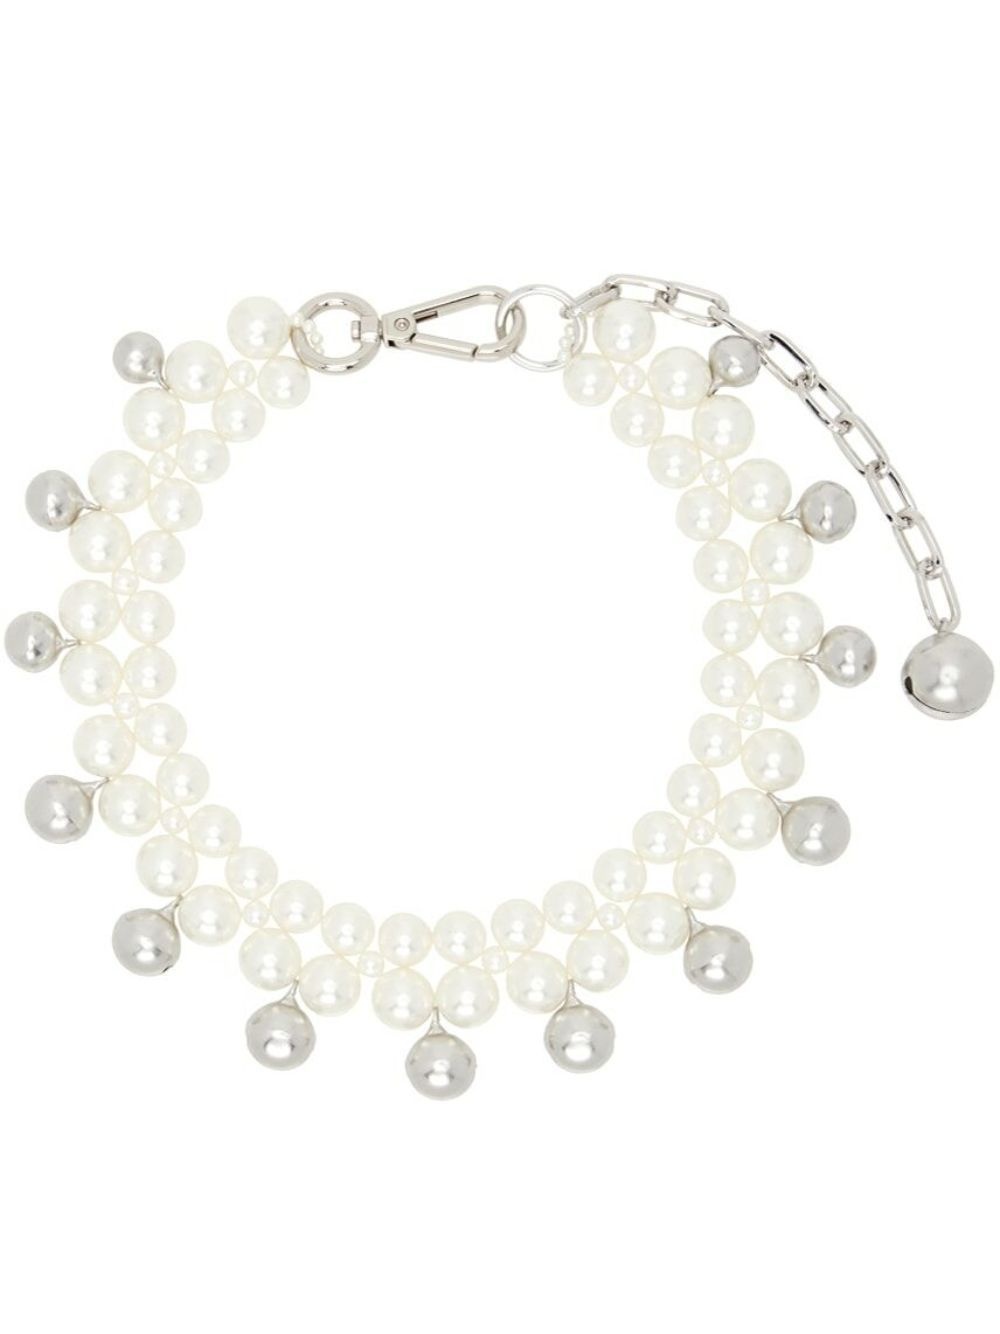 DOUBLE BELL CHARM AND PEARL NECKLACE - 1